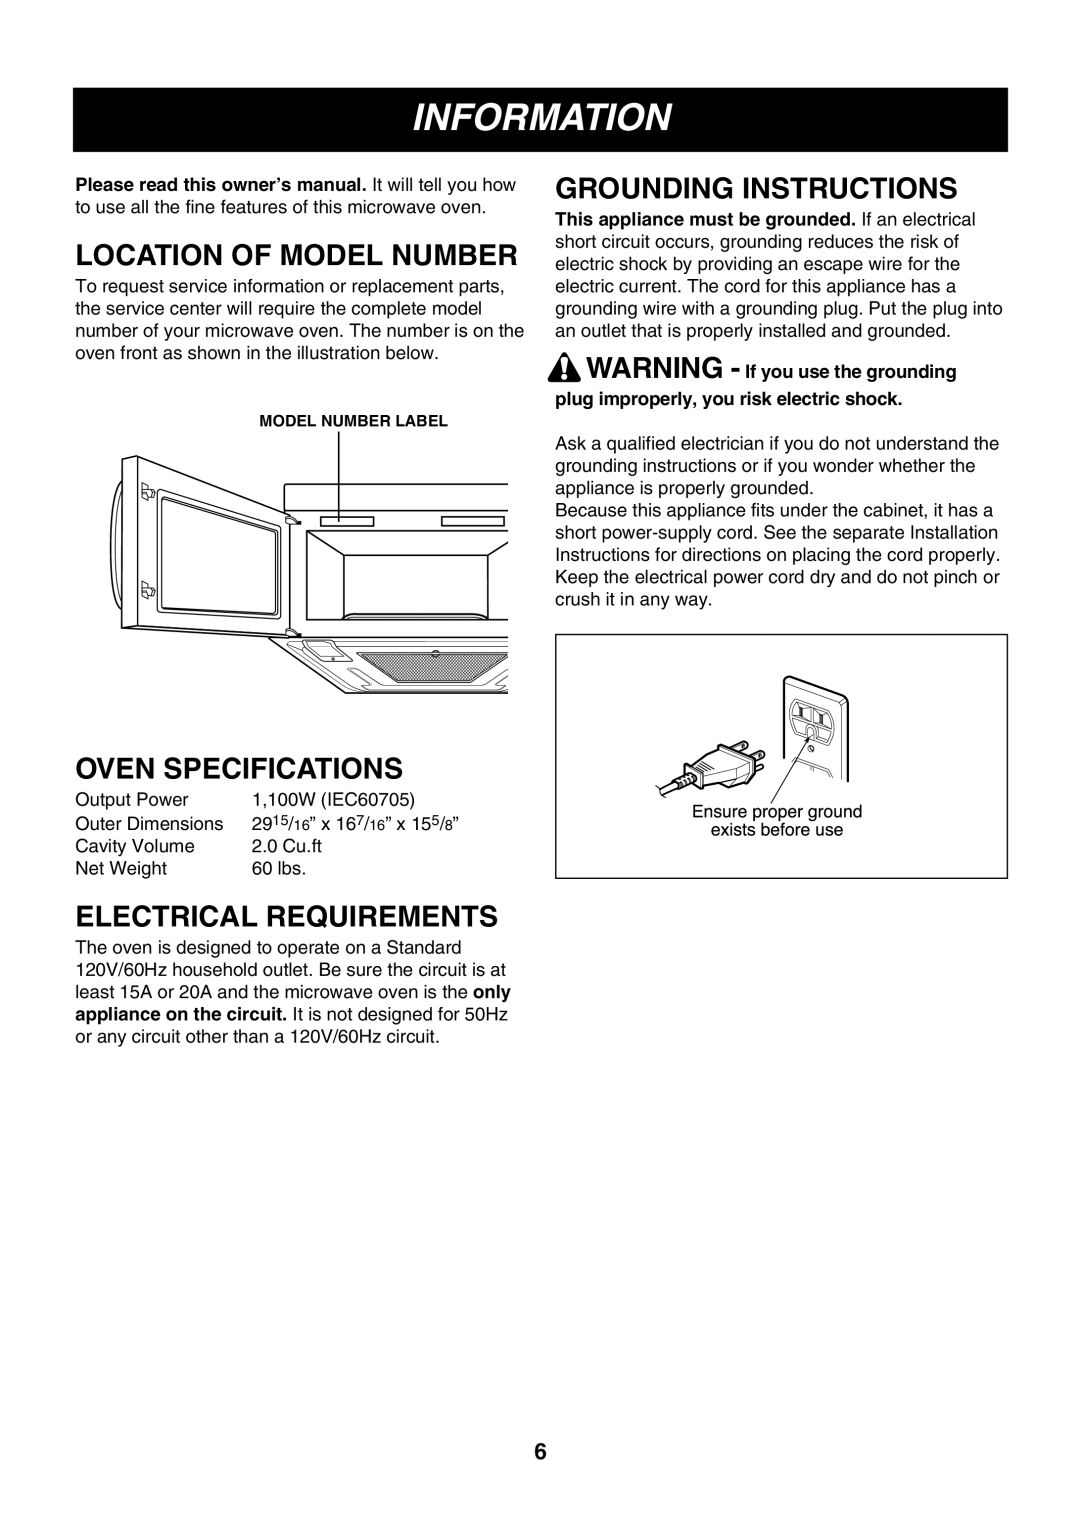 LG Electronics LMVM2055SB owner manual Information, Location Of Model Number, Grounding Instructions, Oven Specifications 